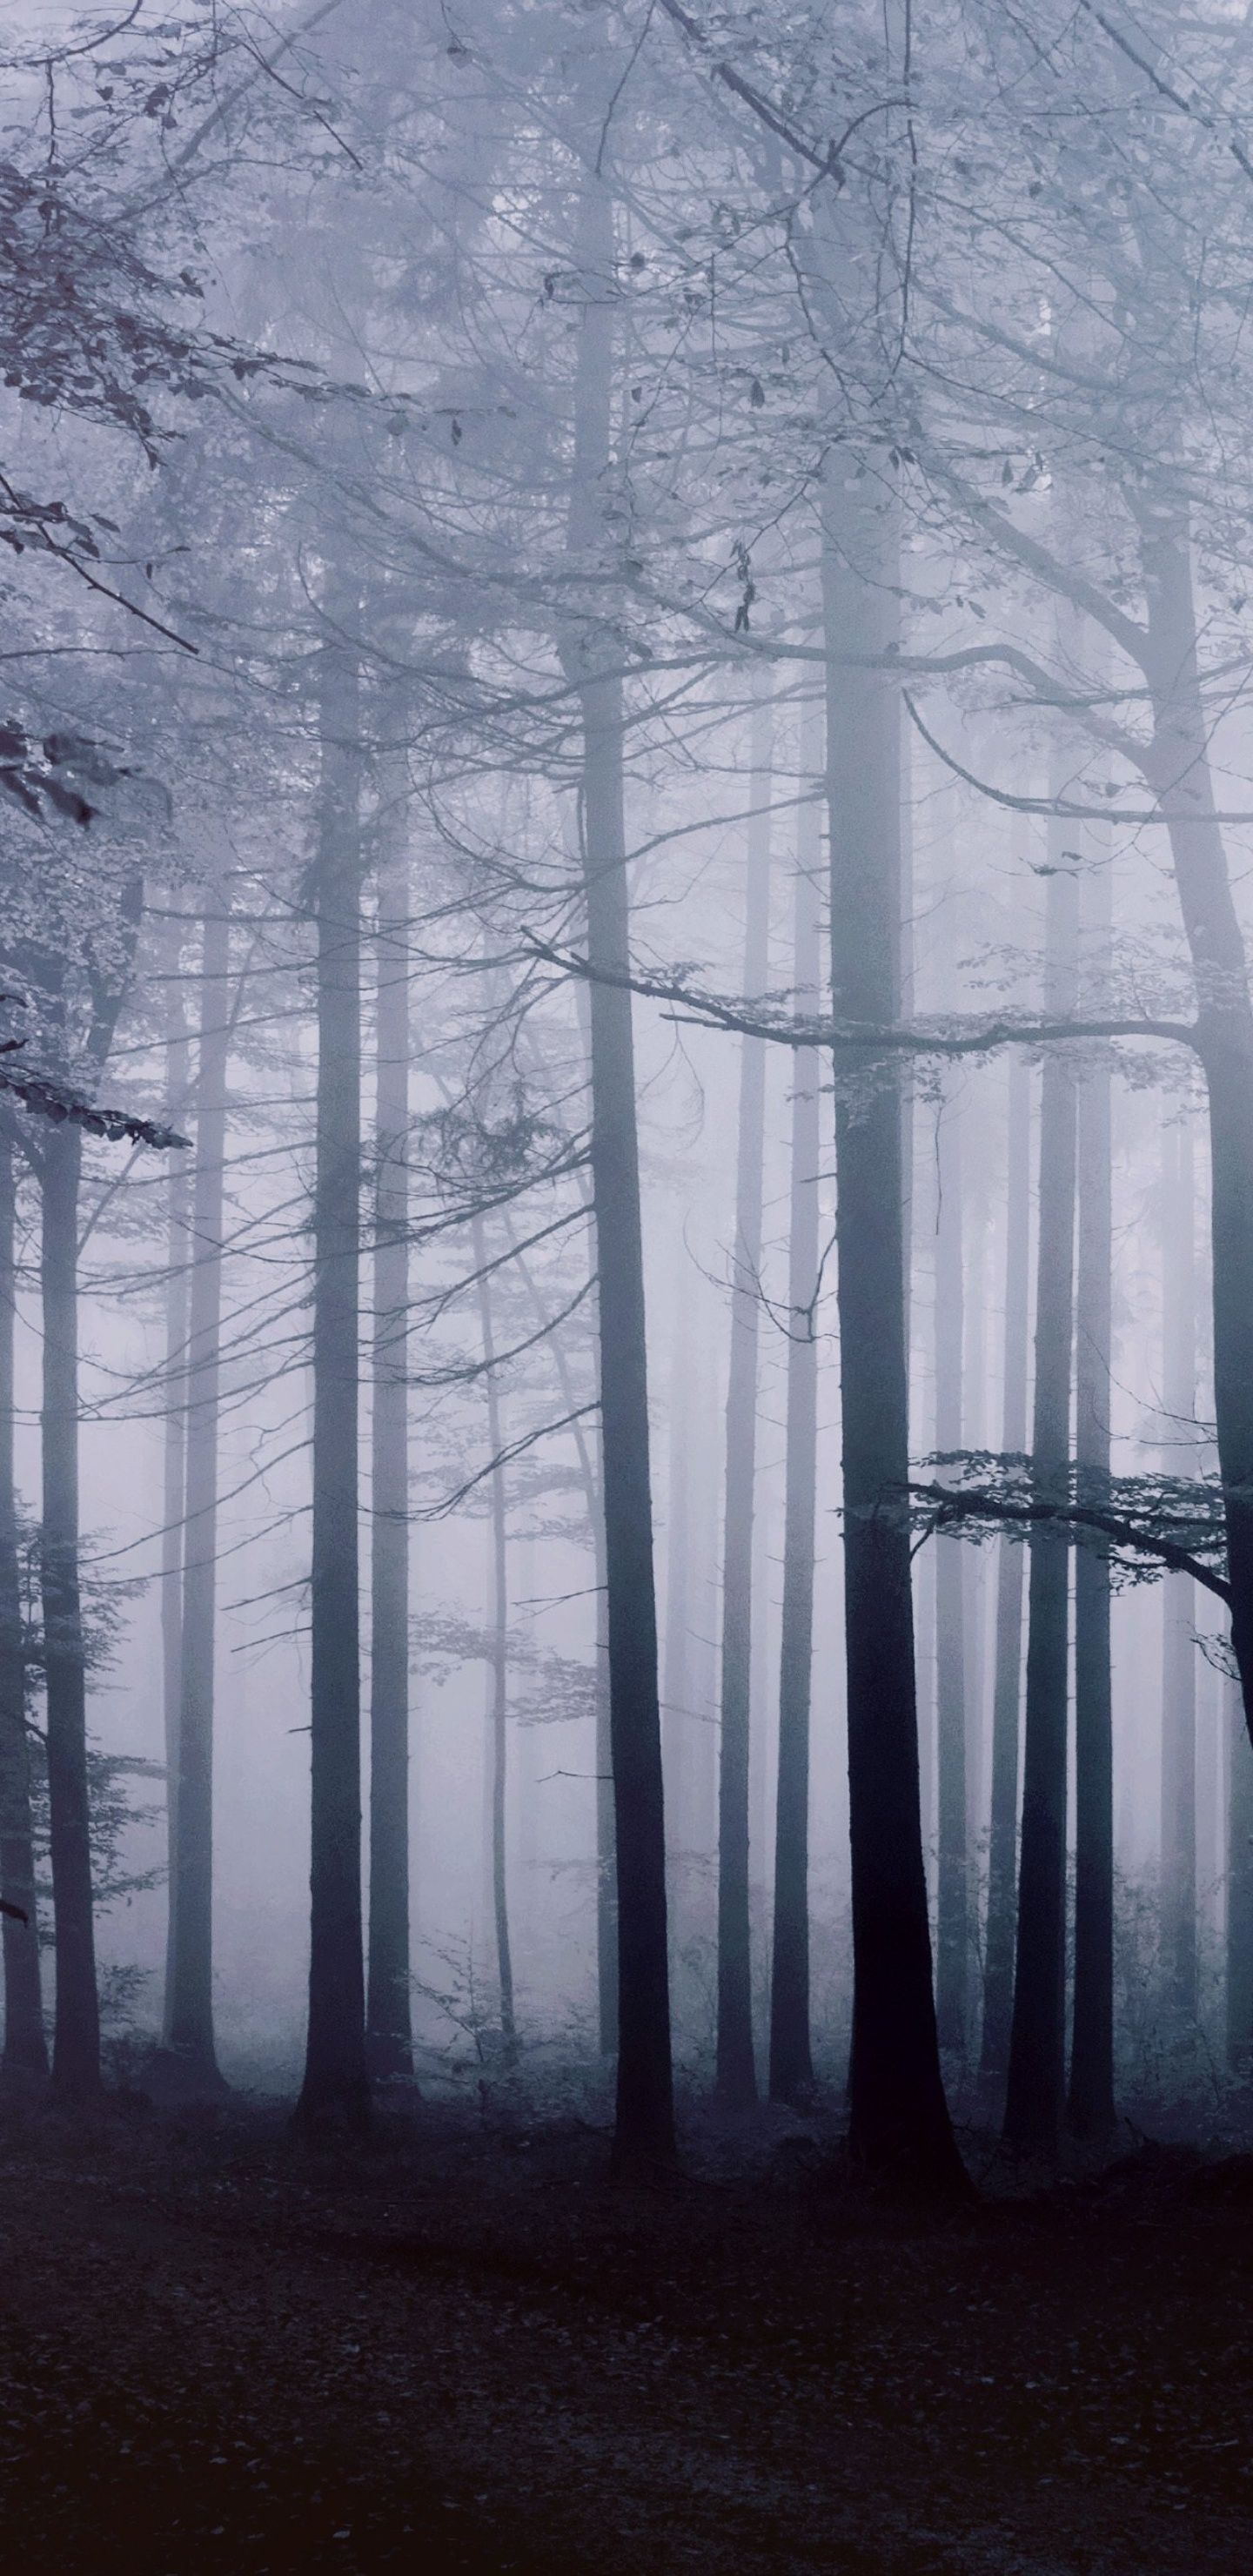 A forest with trees covered in fog. - Woods, foggy forest